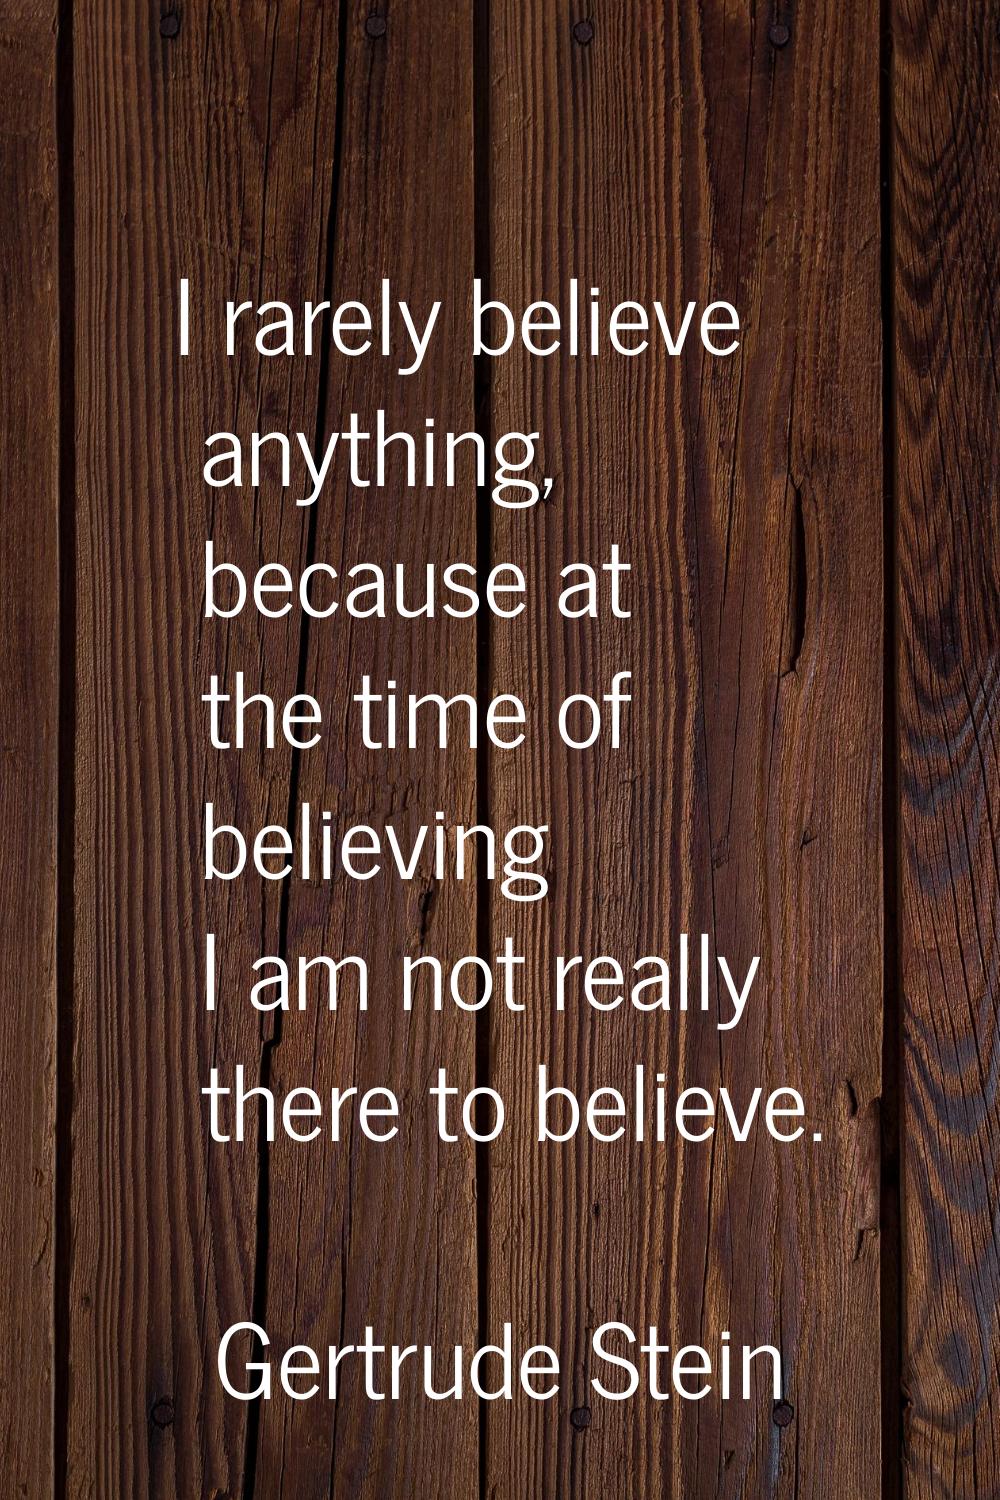 I rarely believe anything, because at the time of believing I am not really there to believe.